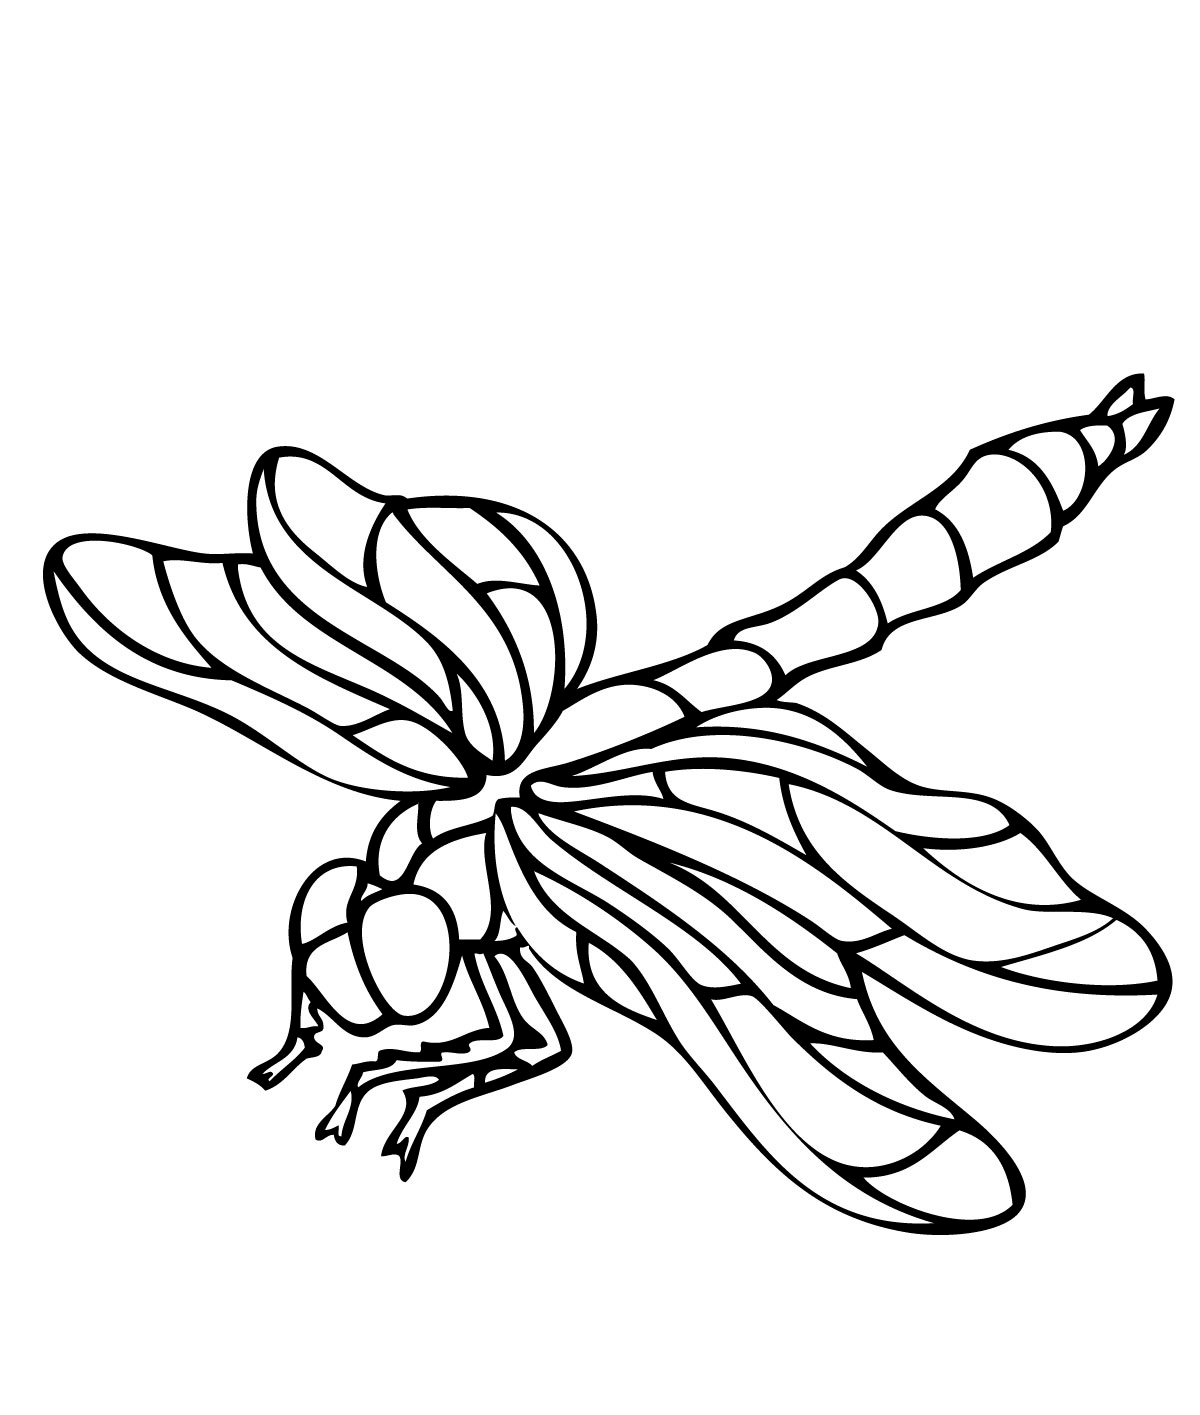 Dragonfly coloring #3, Download drawings